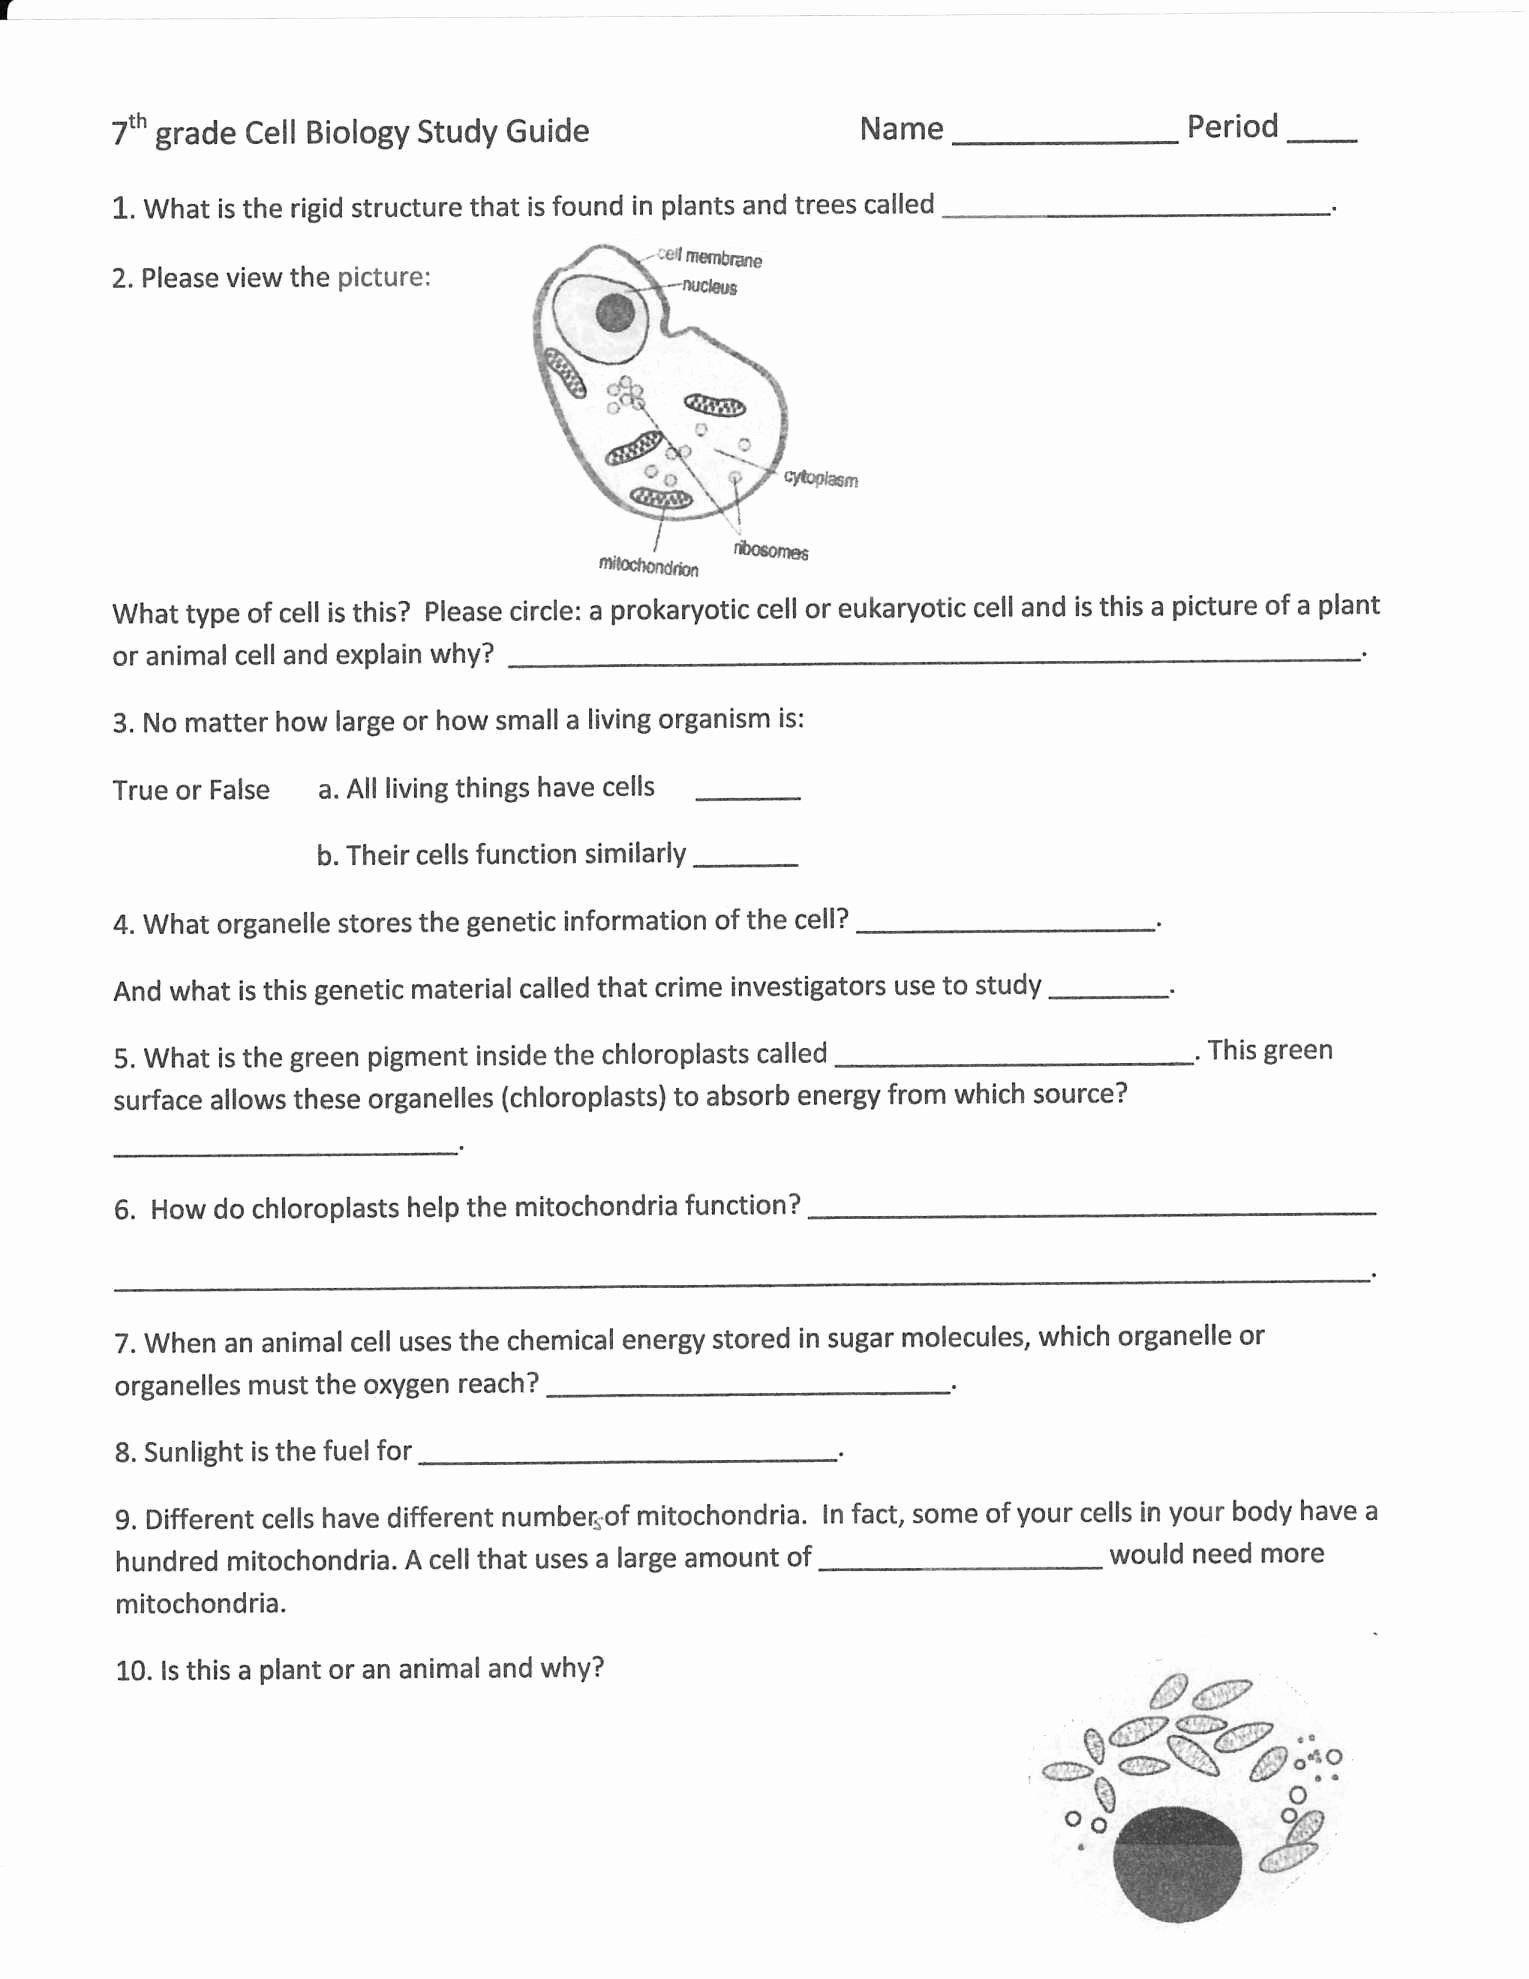 Conservation Of Energy Worksheet Awesome Physical Science Worksheet Conservation Energy 2 Answer